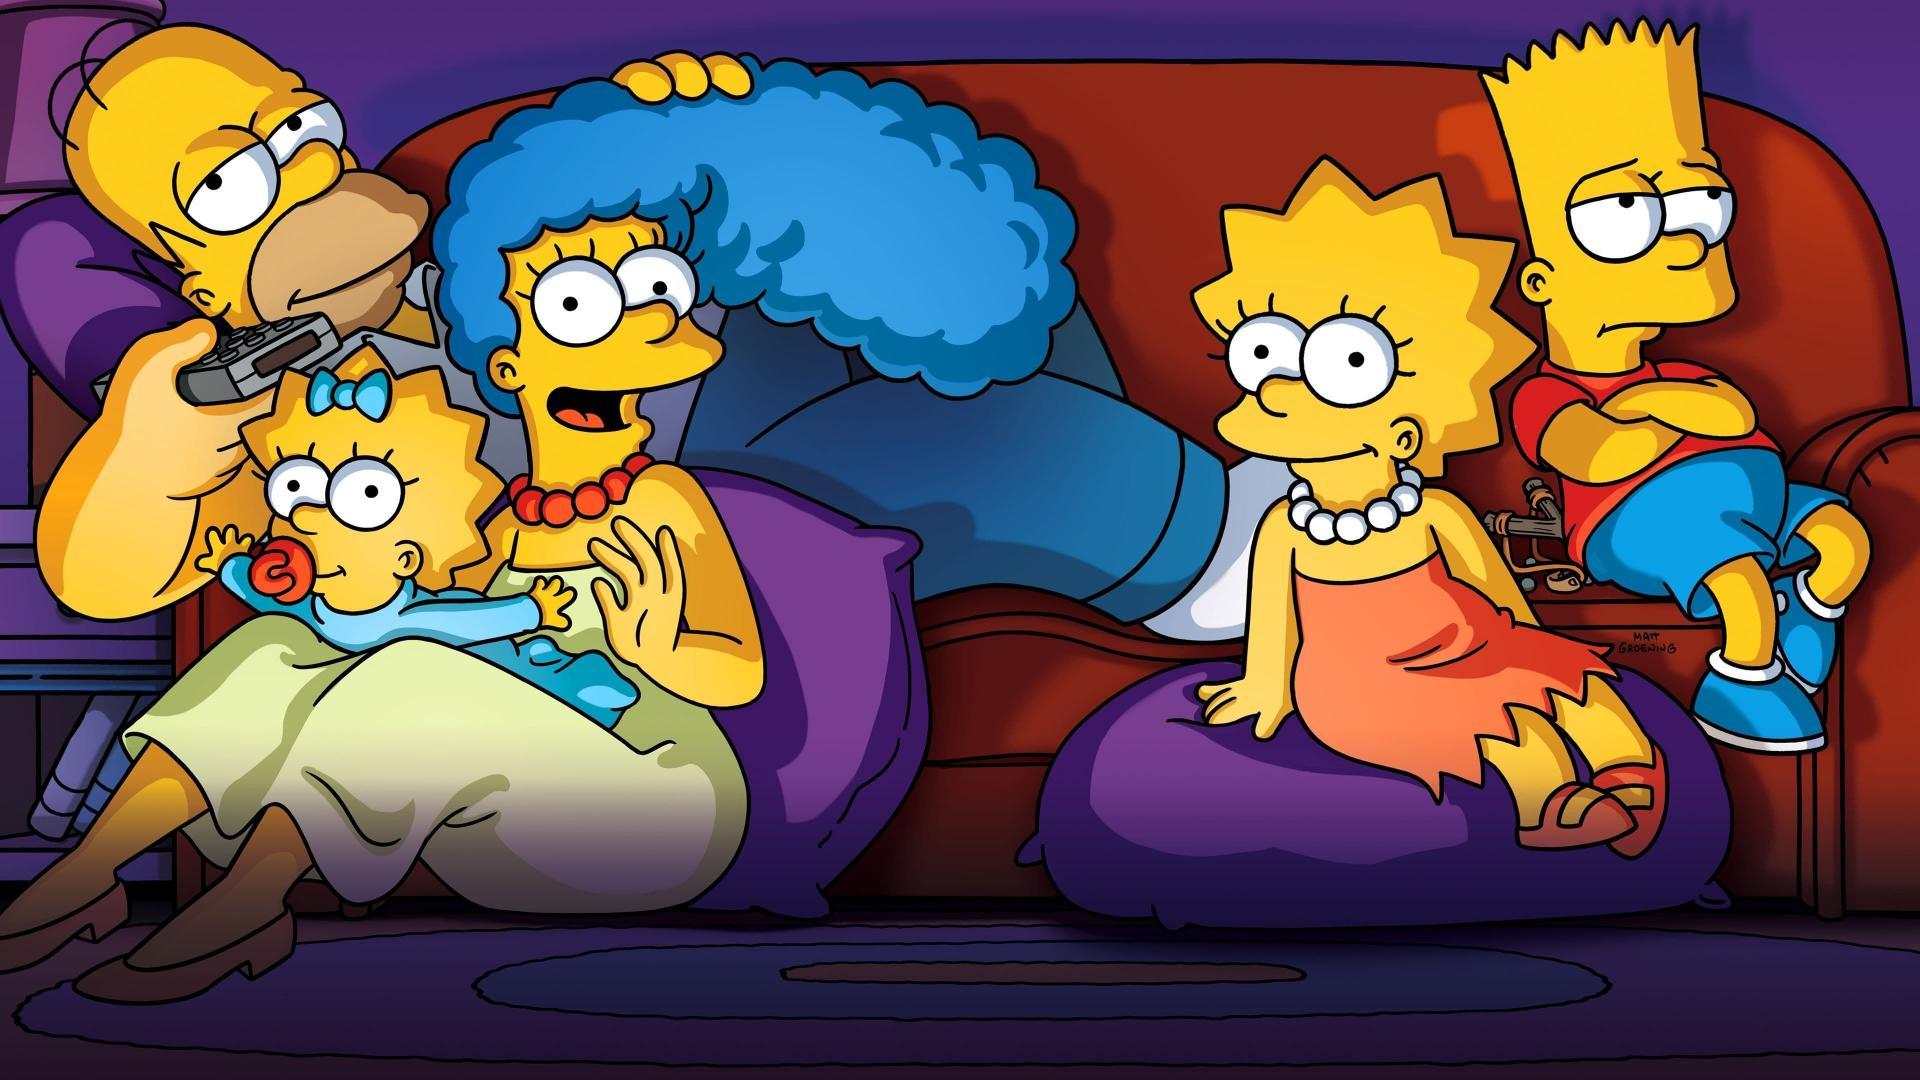 Image gallery for The Simpsons (TV Series) - FilmAffinity